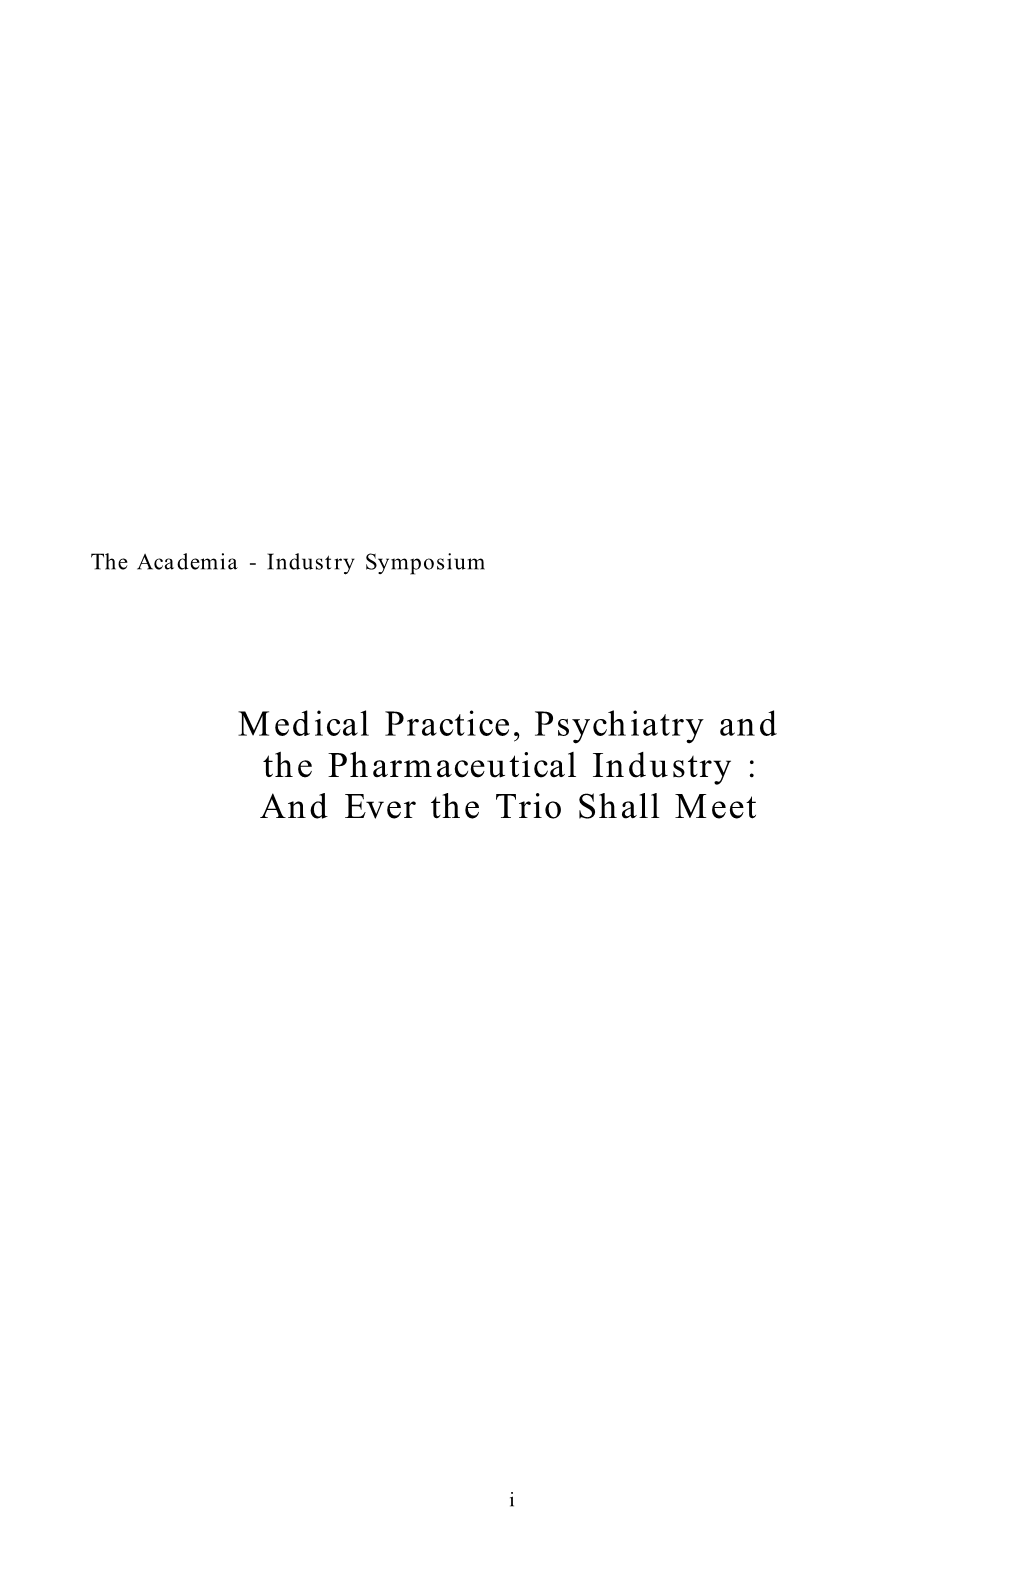 Medical Practice, Psychiatry and the Pharmaceutical Industry : and Ever the Trio Shall Meet